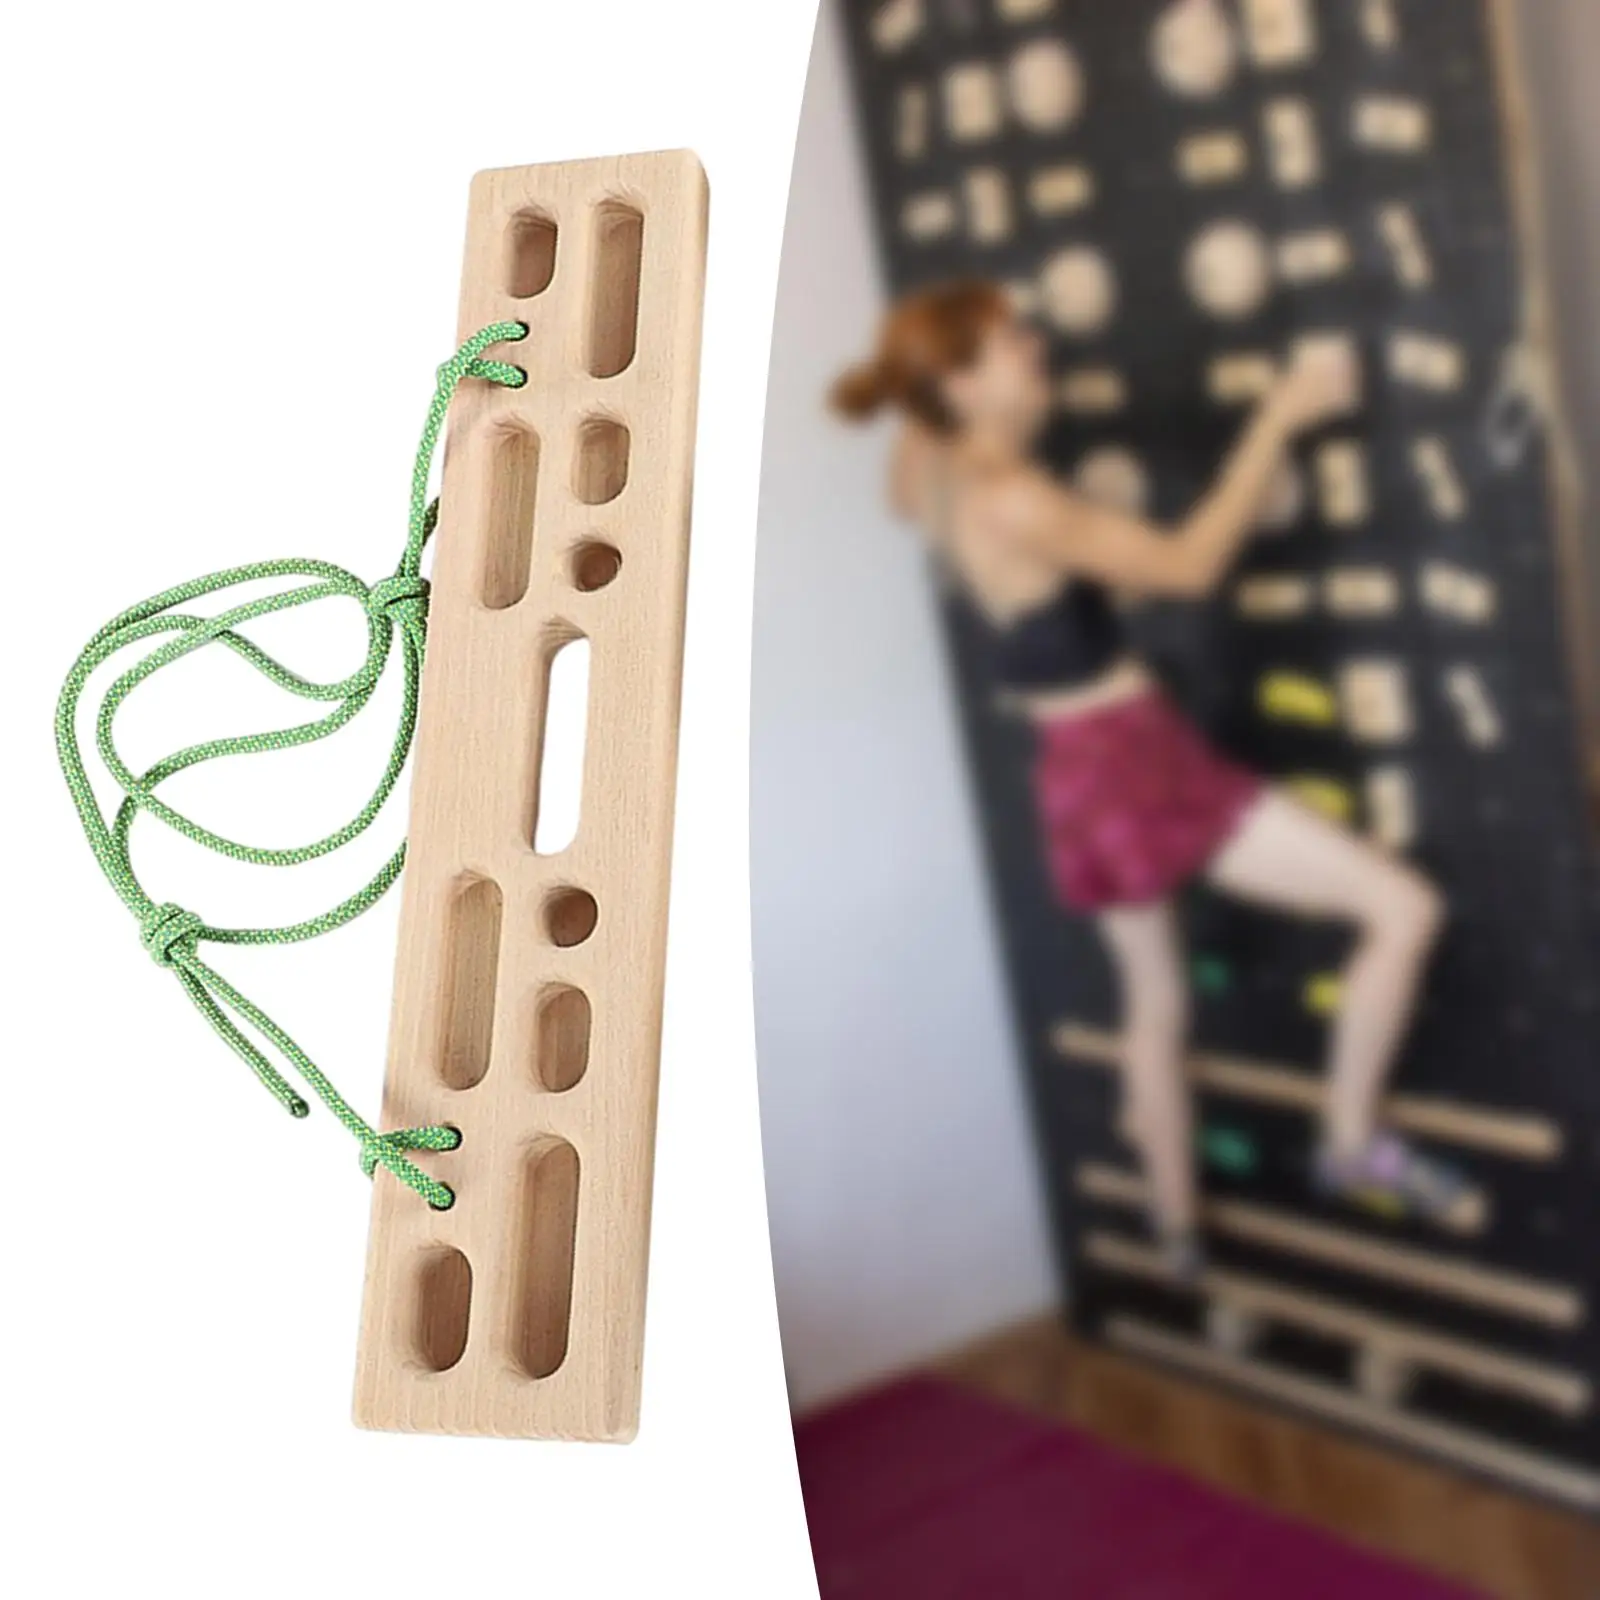 Climbing Hangboard Climbing Fingerboard Upper Body Workouts Pull up Board for Home Climbers Bouldering Beginners Doorway